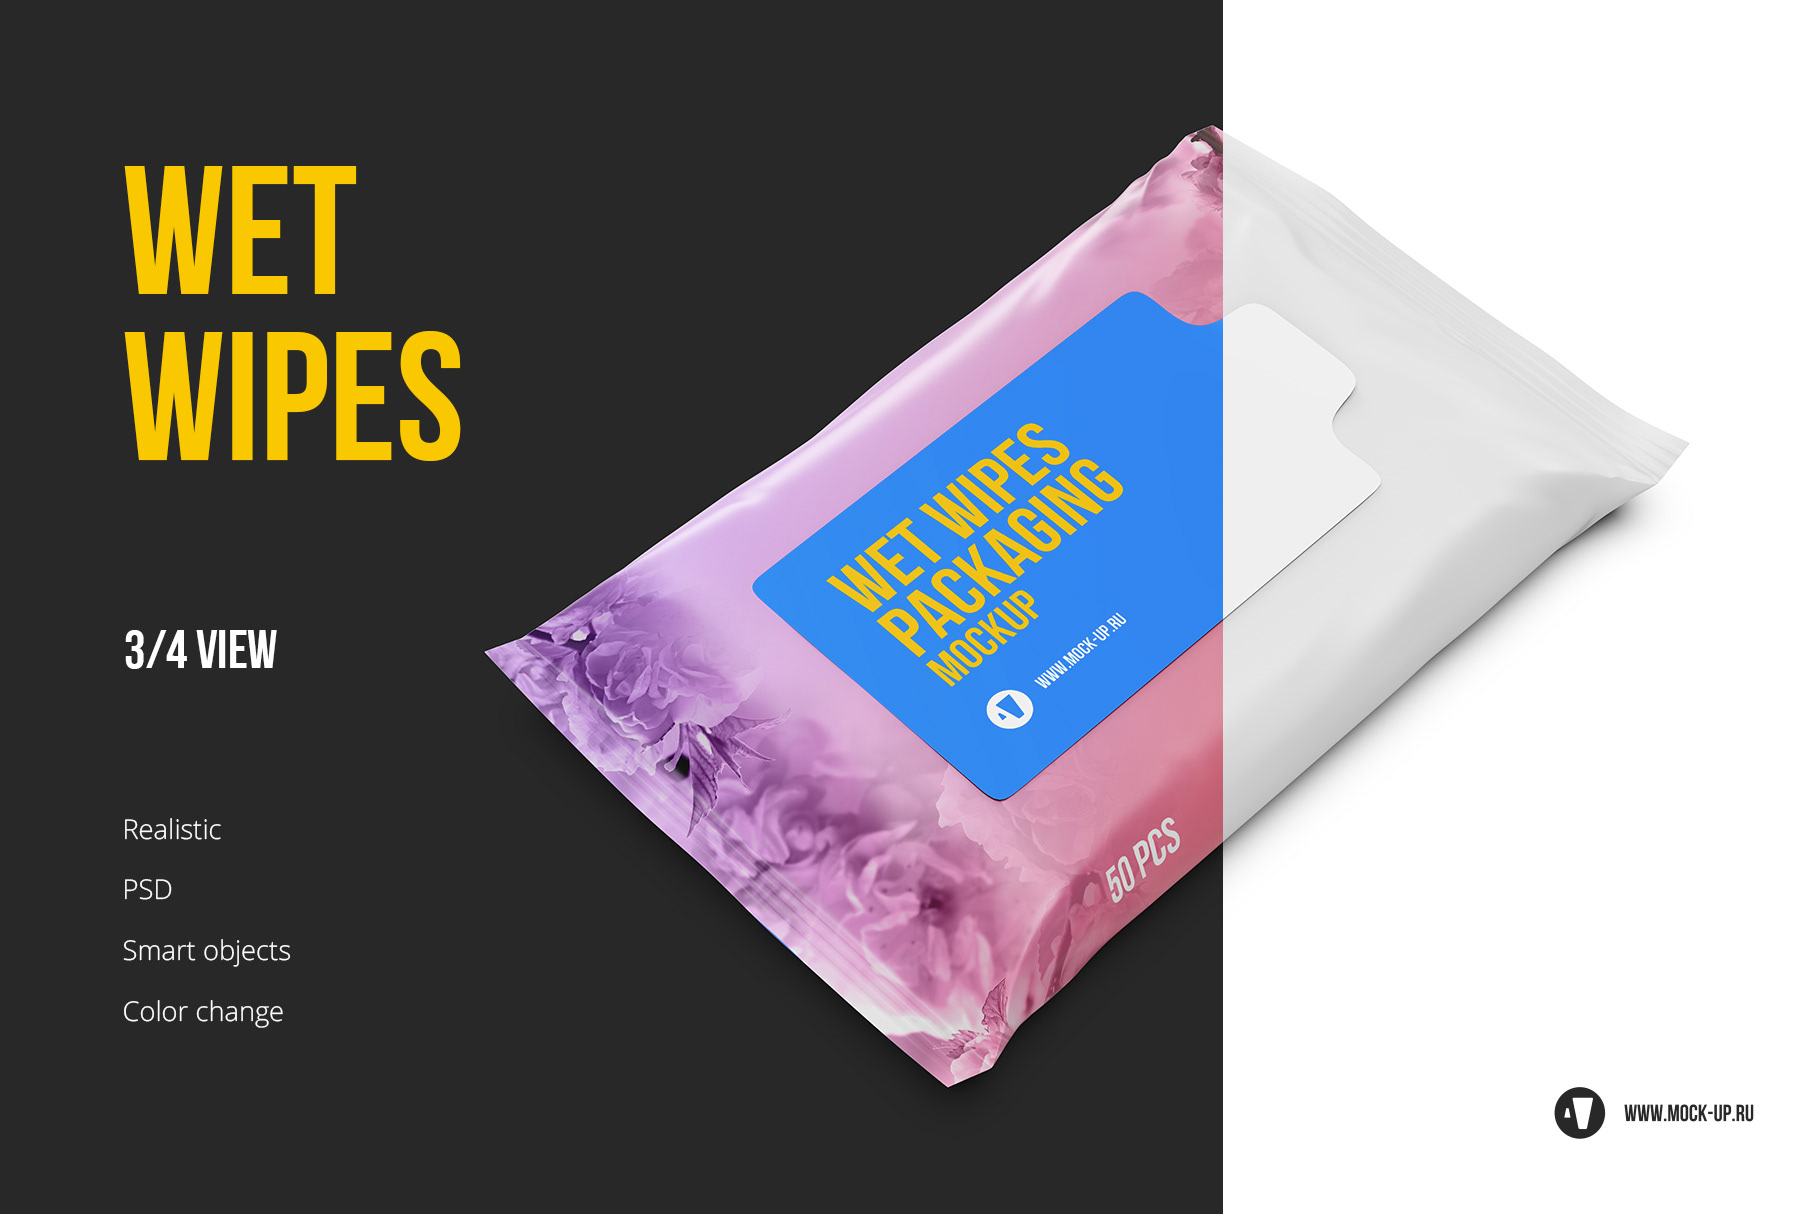 Exclusive Product Mockups - Wet Wipes 3/4 view mockup